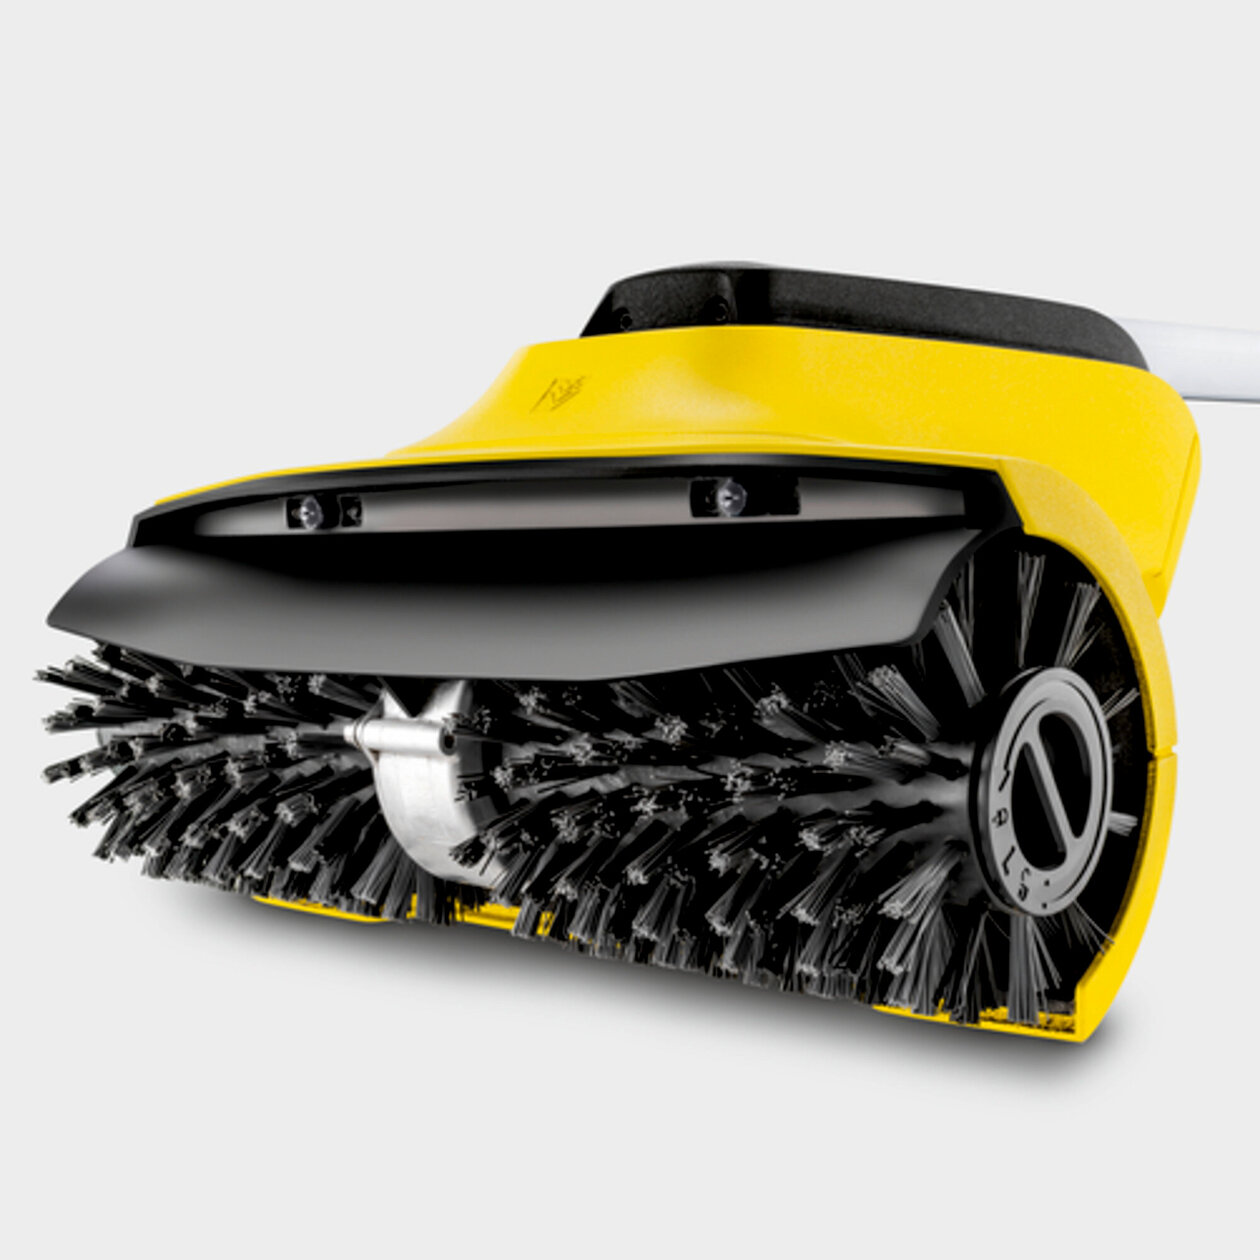  PCL 4 patio cleaner: Two high-quality rotating roller brushes (included in the scope of supply for wooden surfaces)